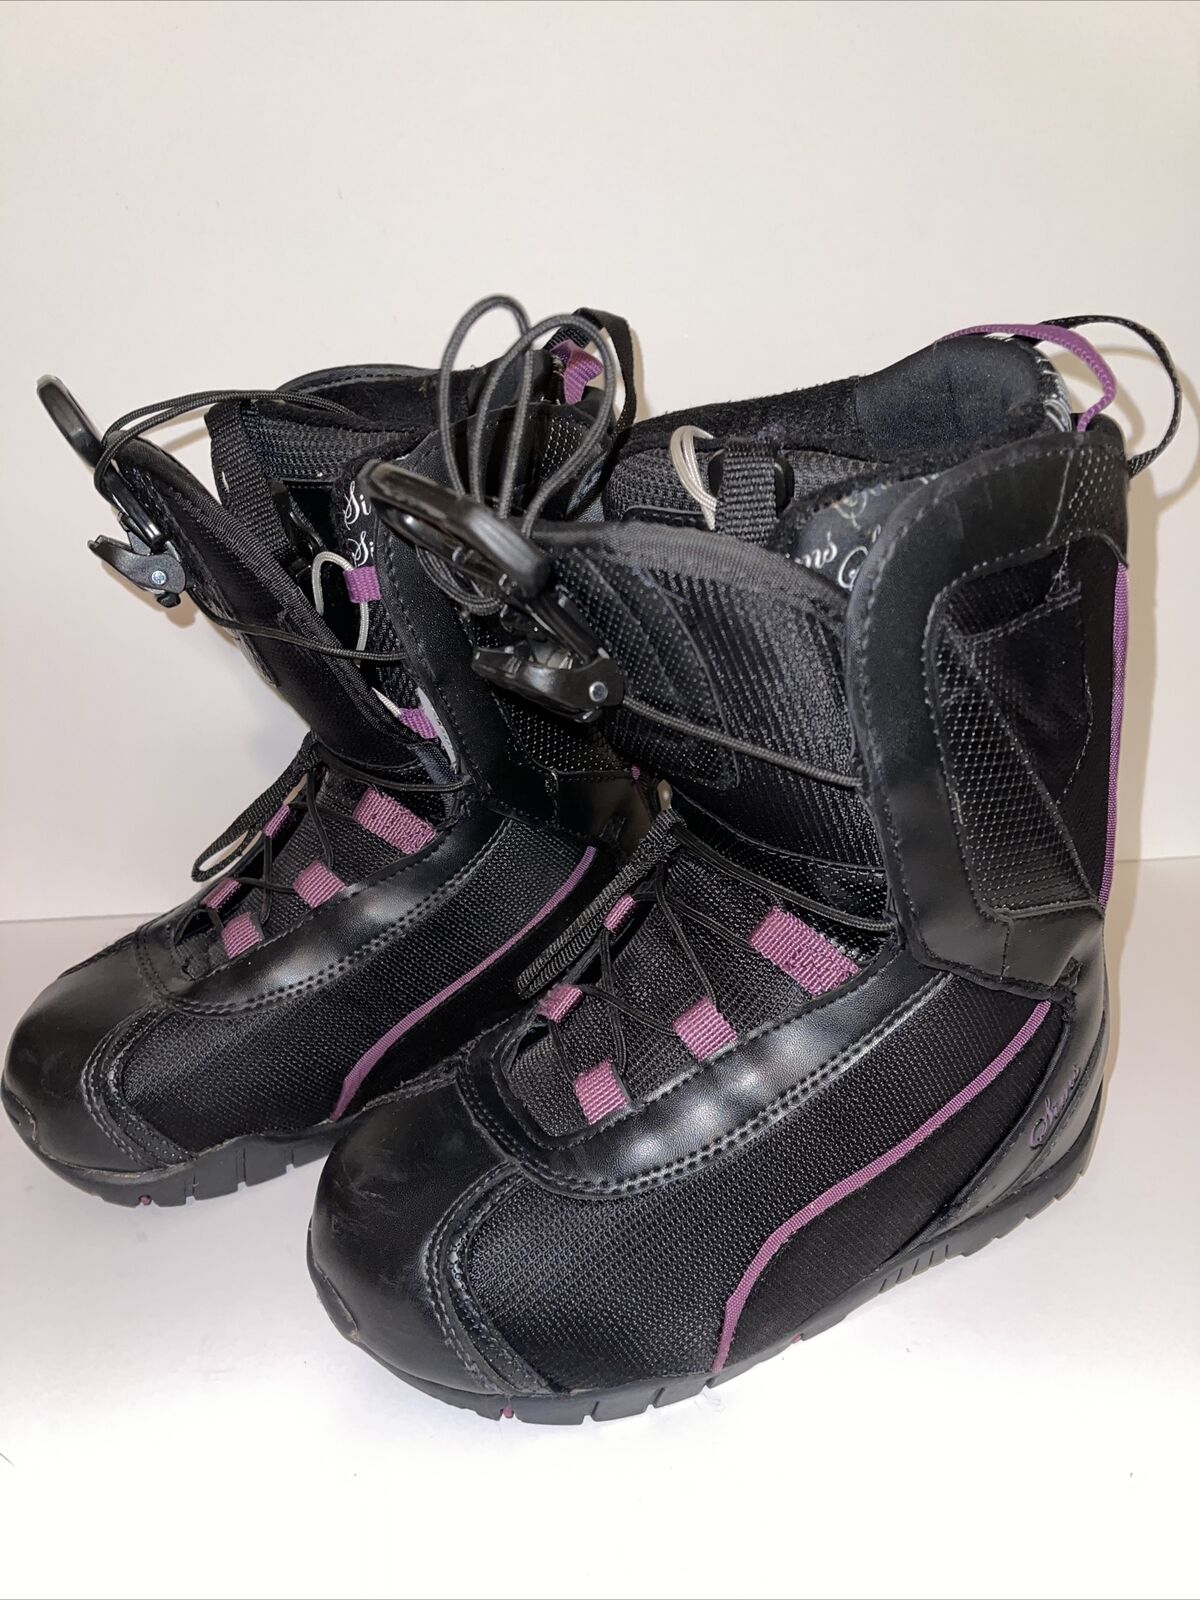 Sims Caliber Woman’s Snowboard Boots Size 6